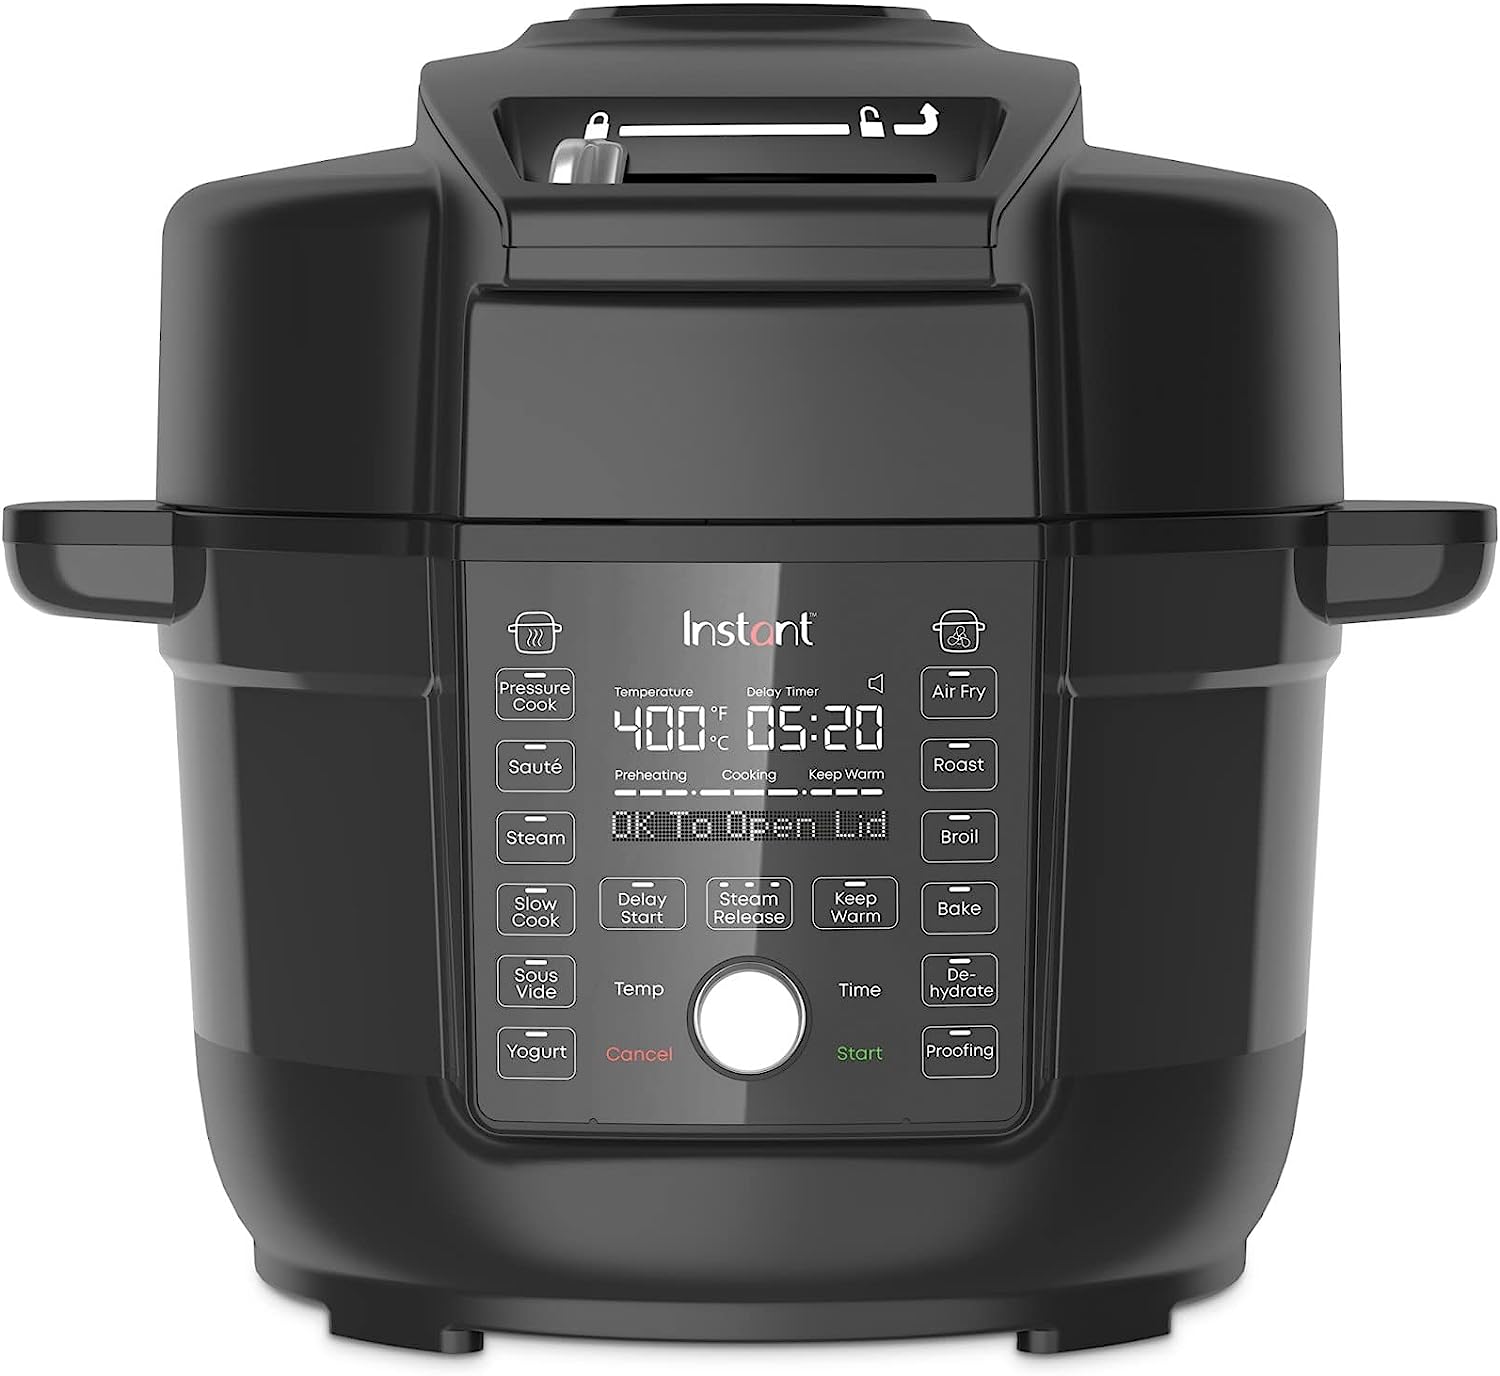 https://bigbigmart.com/wp-content/uploads/2023/06/Instant-Pot-Duo-Crisp-Ultimate-Lid-13-in-1-Air-Fryer-and-Pressure-Cooker-Combo-Saute-Slow-Cook-Bake-Steam-Warm-Roast-Dehydrate-Sous-Vide-Proof-App-With-Over-800-Recipes-6.5-Quart.jpg